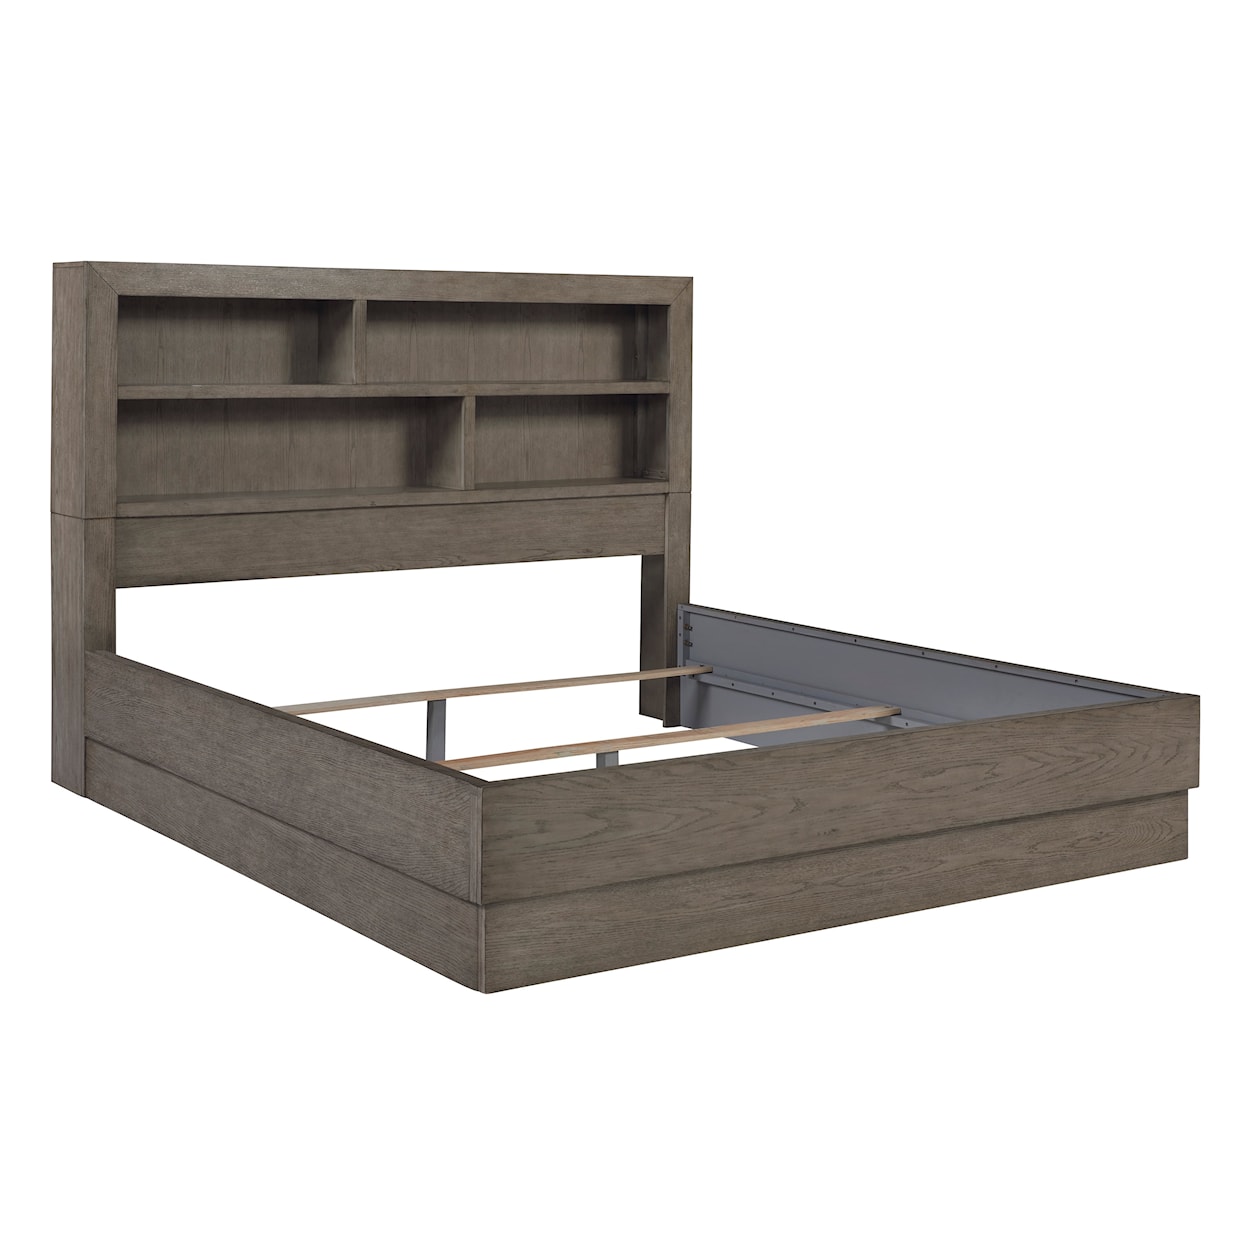 Benchcraft Anibecca King Bookcase Bed